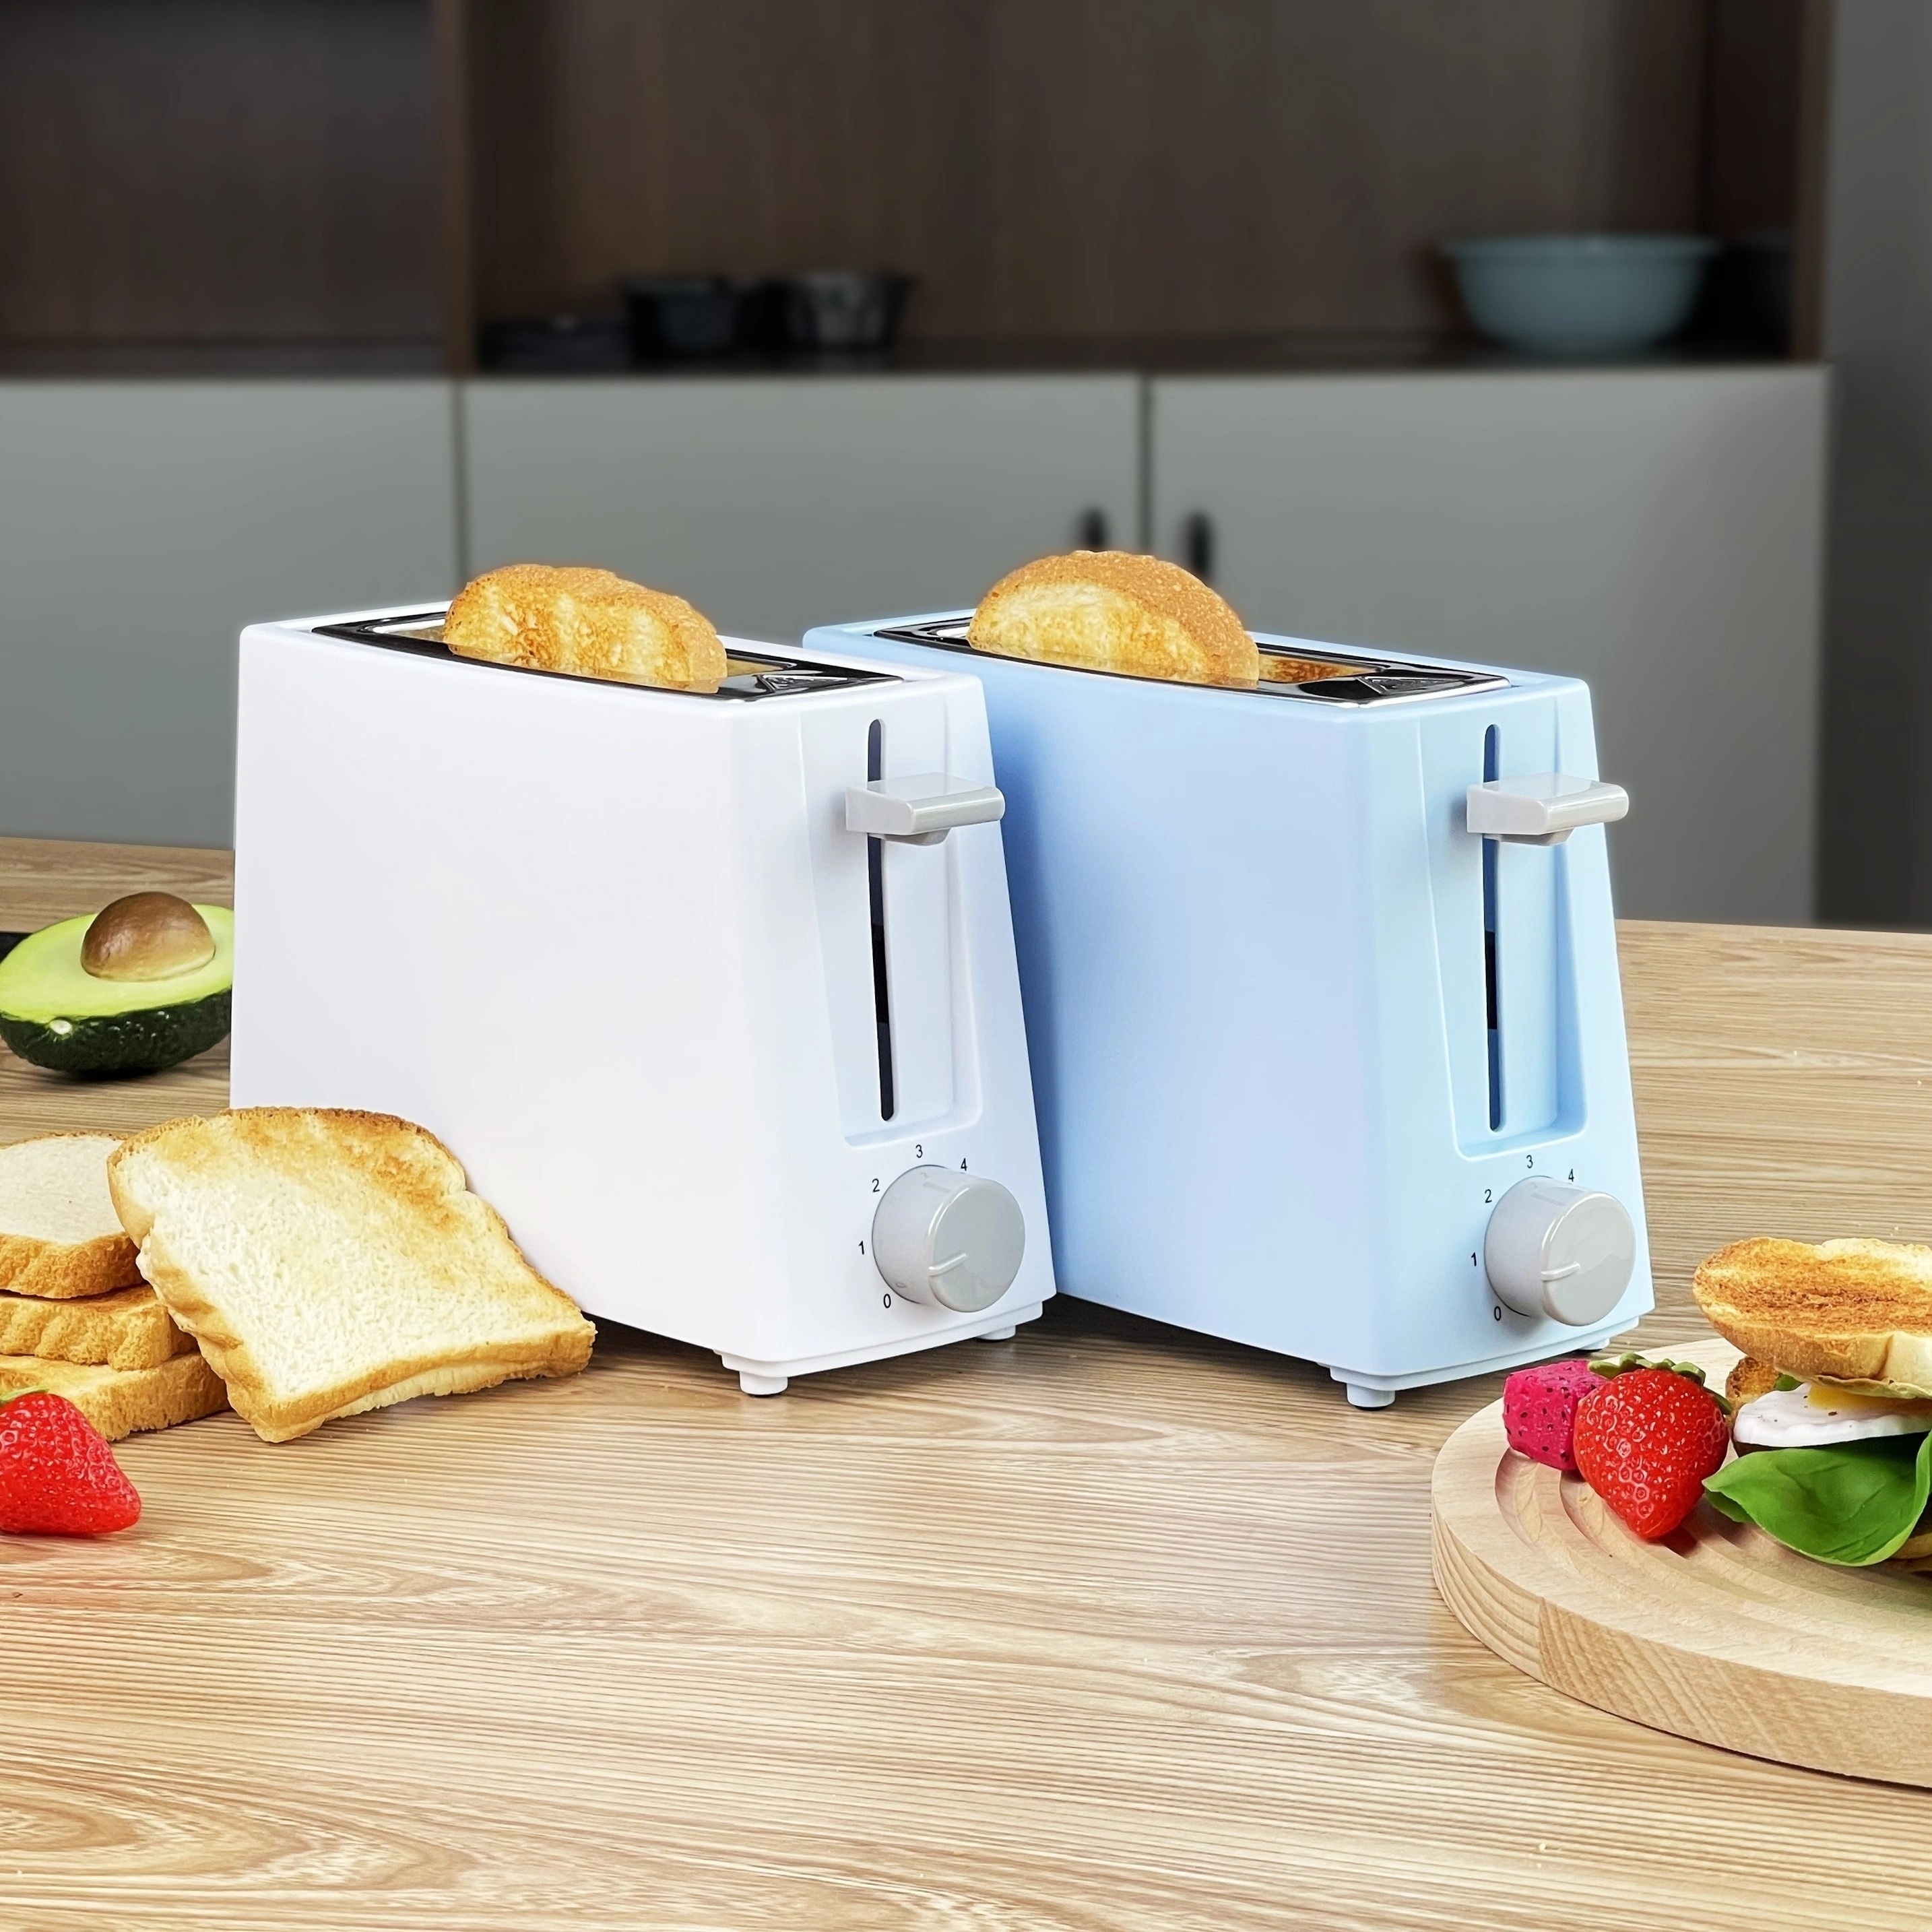 1pc, Electric Toaster Maker, Toaster Home, Toaster Machine, Driver Toaster  Breakfast Sandwich Maker, Cookware, Kitchenware, Kitchen Accessories Kitche